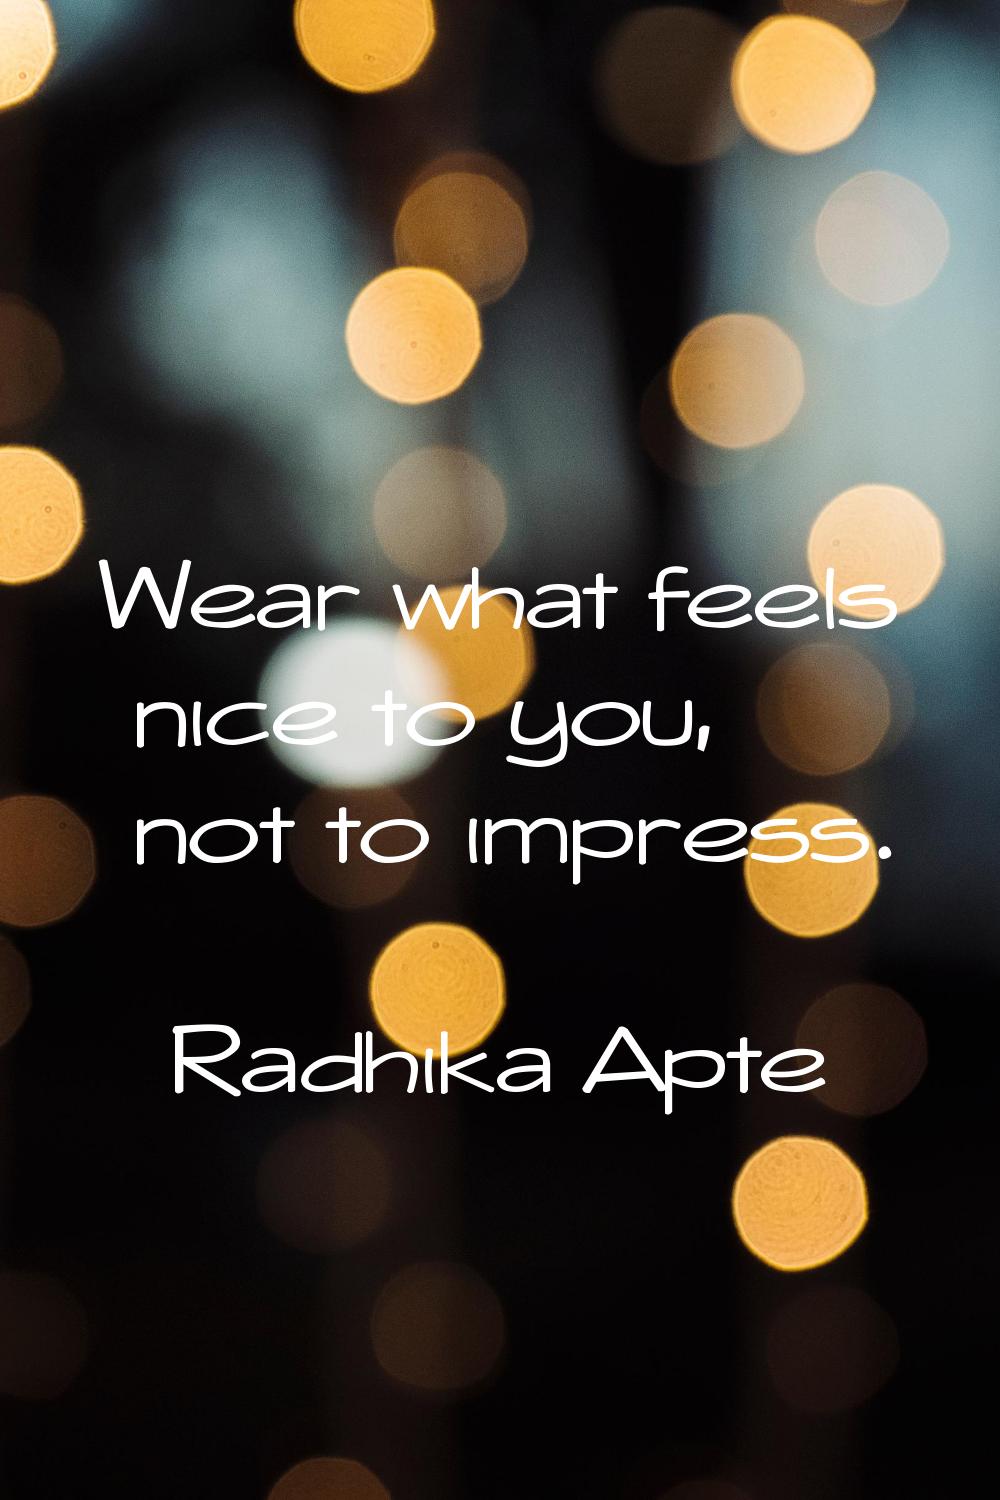 Wear what feels nice to you, not to impress.